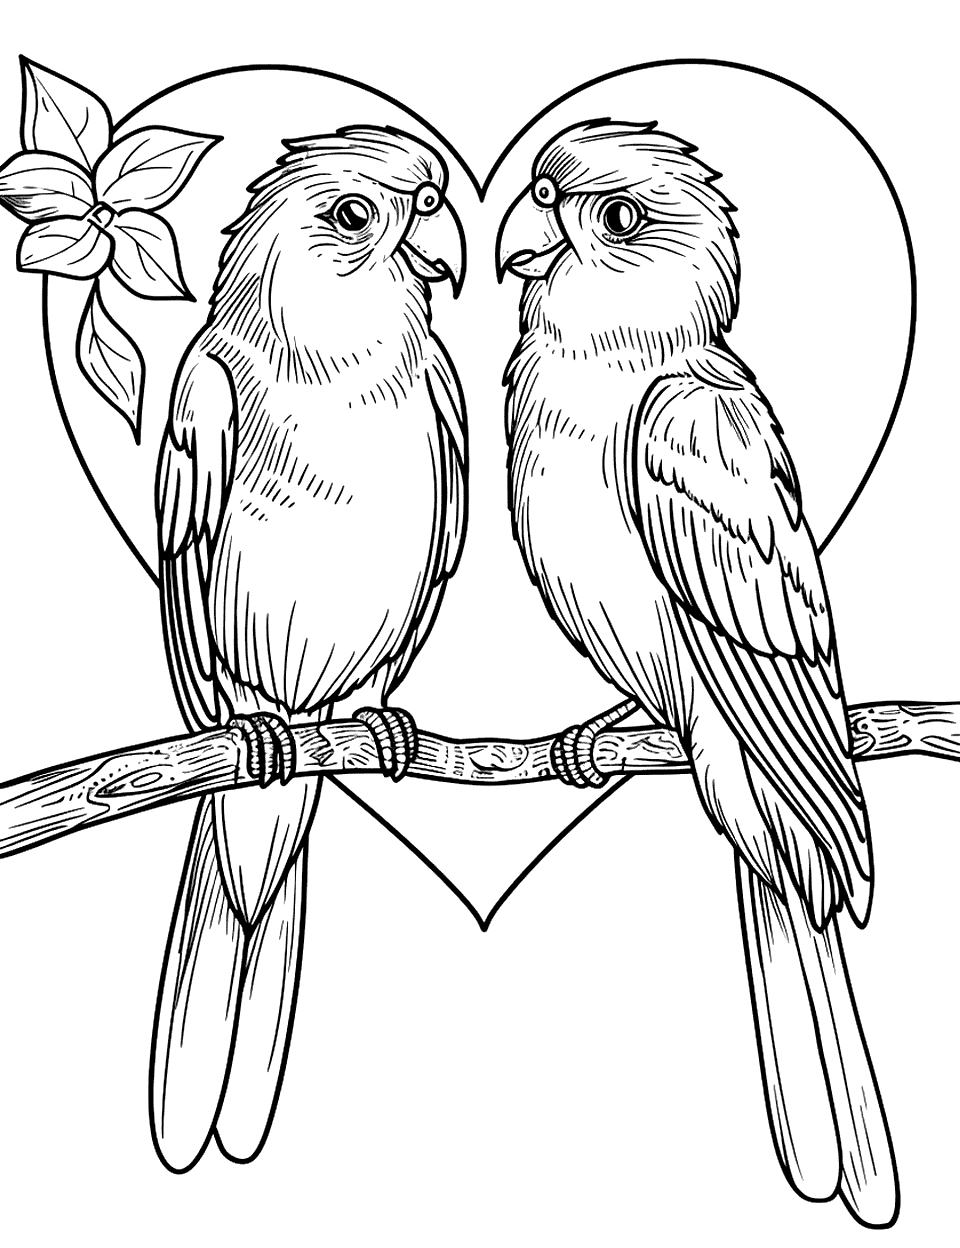 Love Birds in a Heart Shape Parrot Coloring Page - Two love birds forming a heart shape with their bodies as they perch close together on a branch.